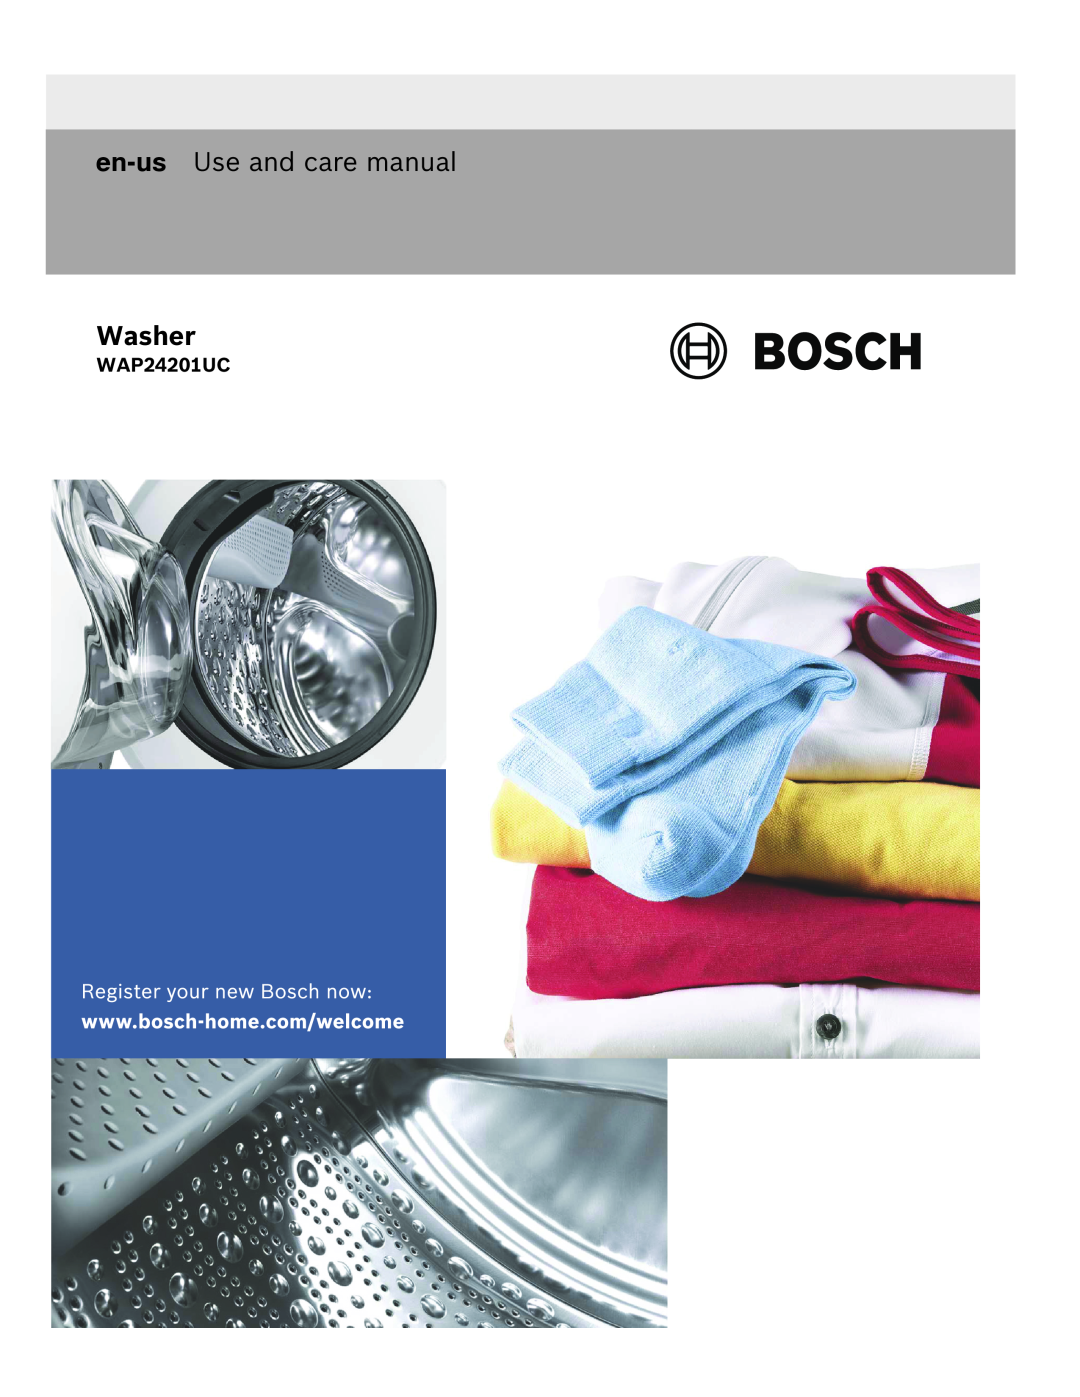 Bosch Appliances WAP24201UC manual en-us Use and care manual, Washer 